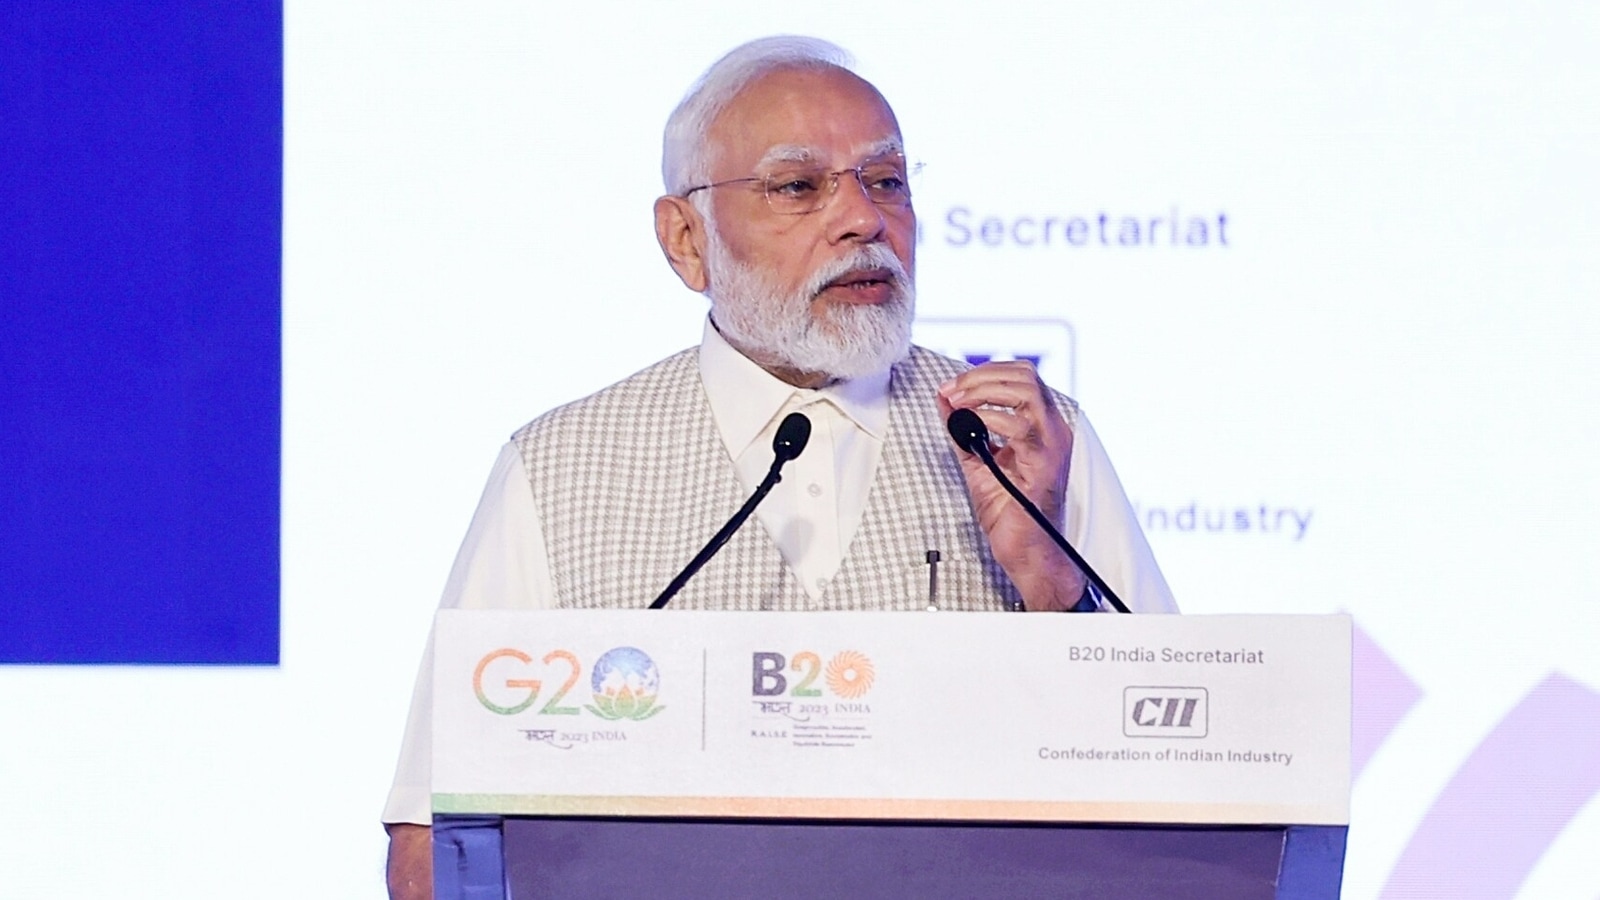 Modi on AI: PM calls for global framework for ethical use of Artificial Intelligence